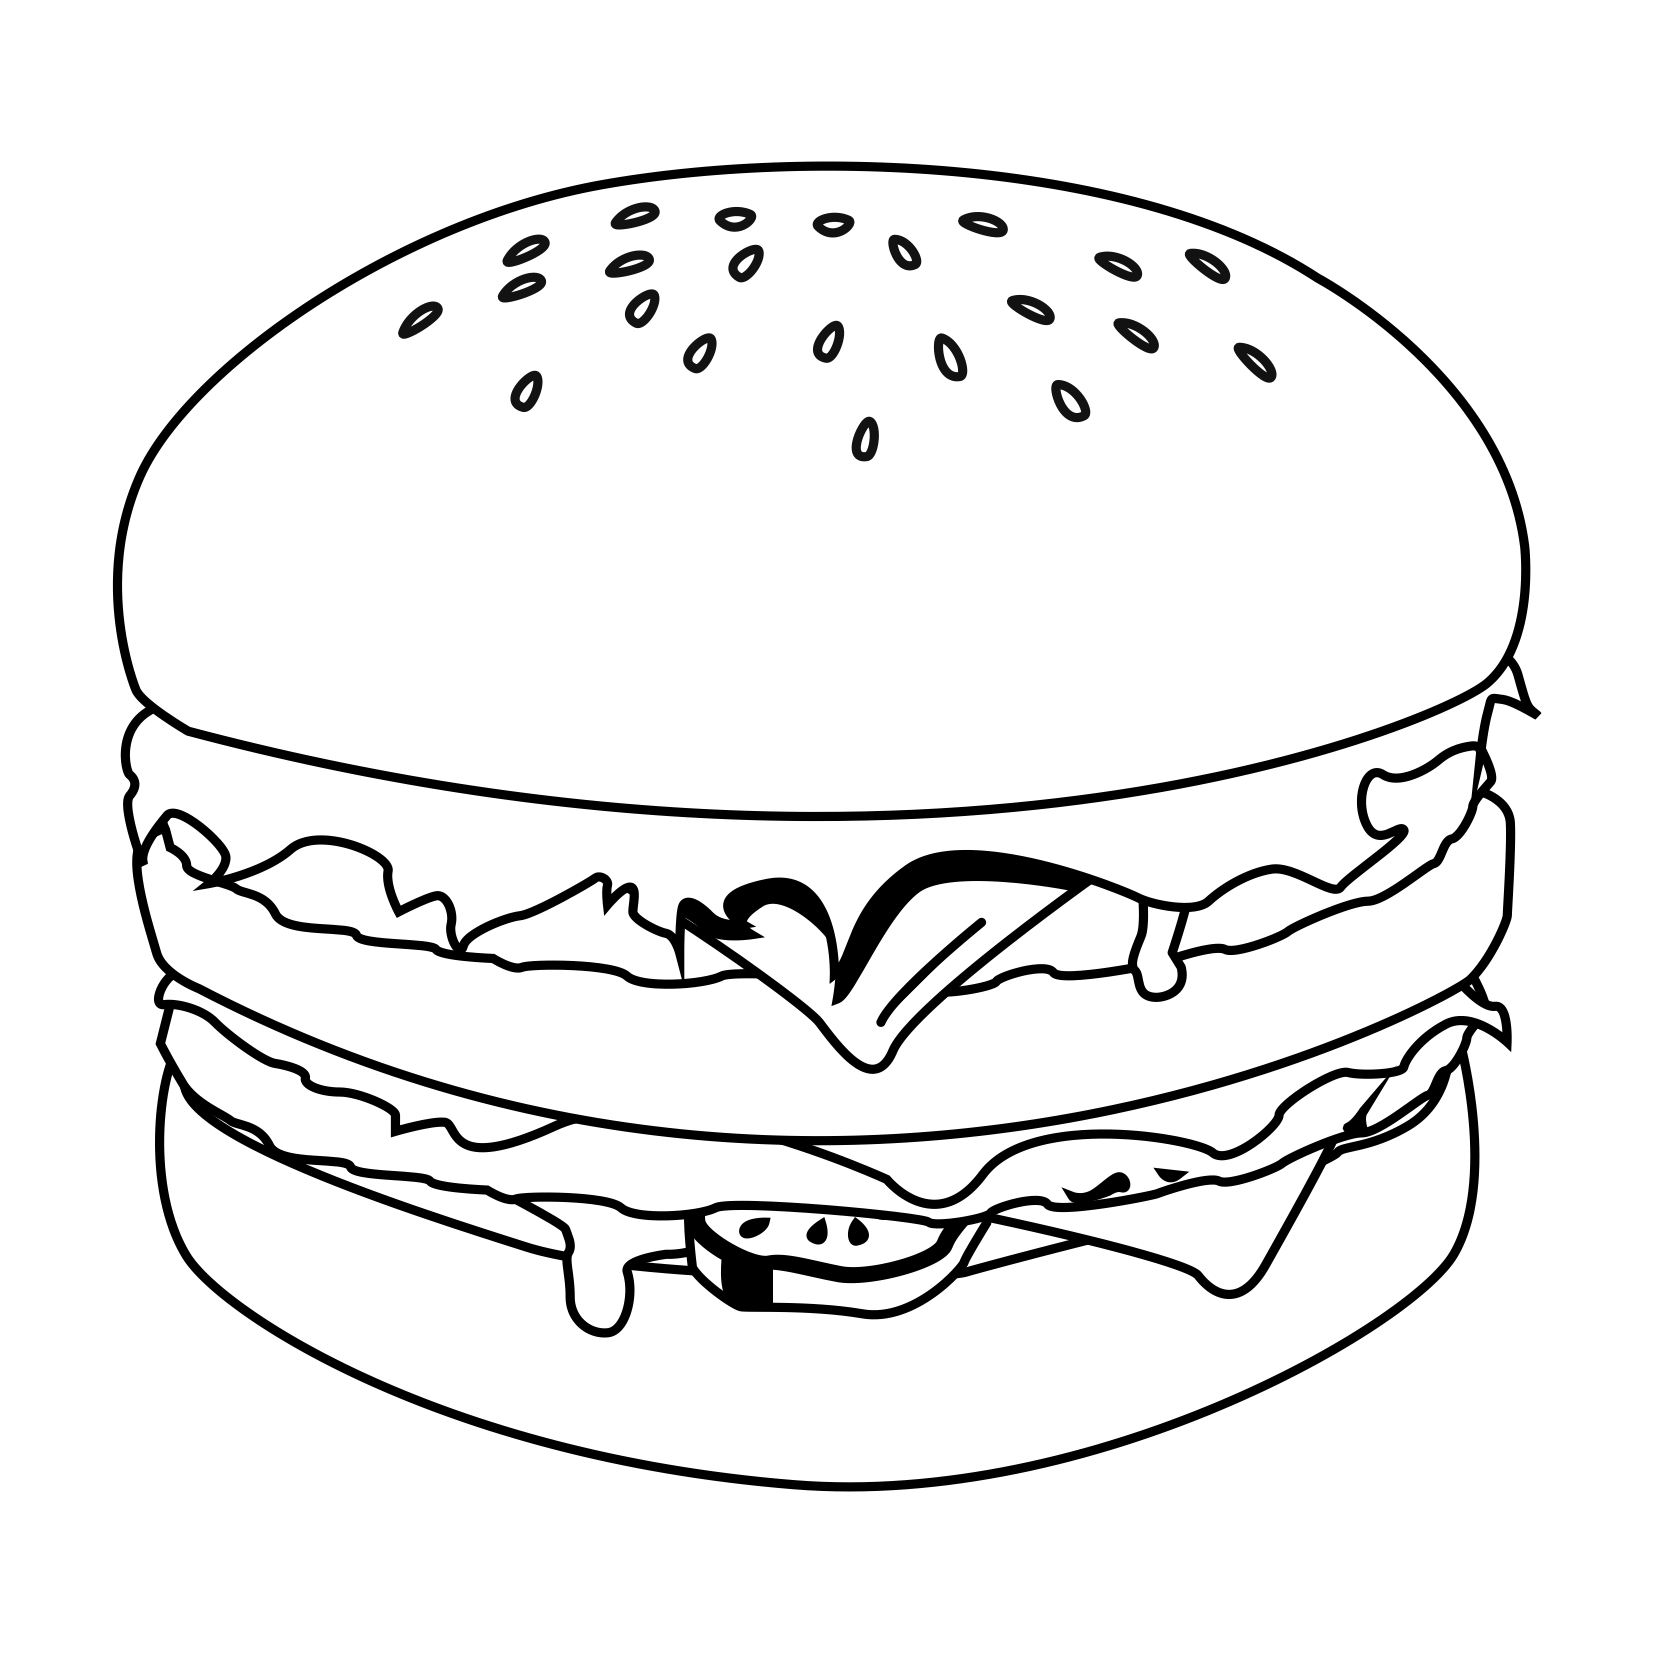 Hamburger Coloring Pages - Best Coloring Pages For Kids